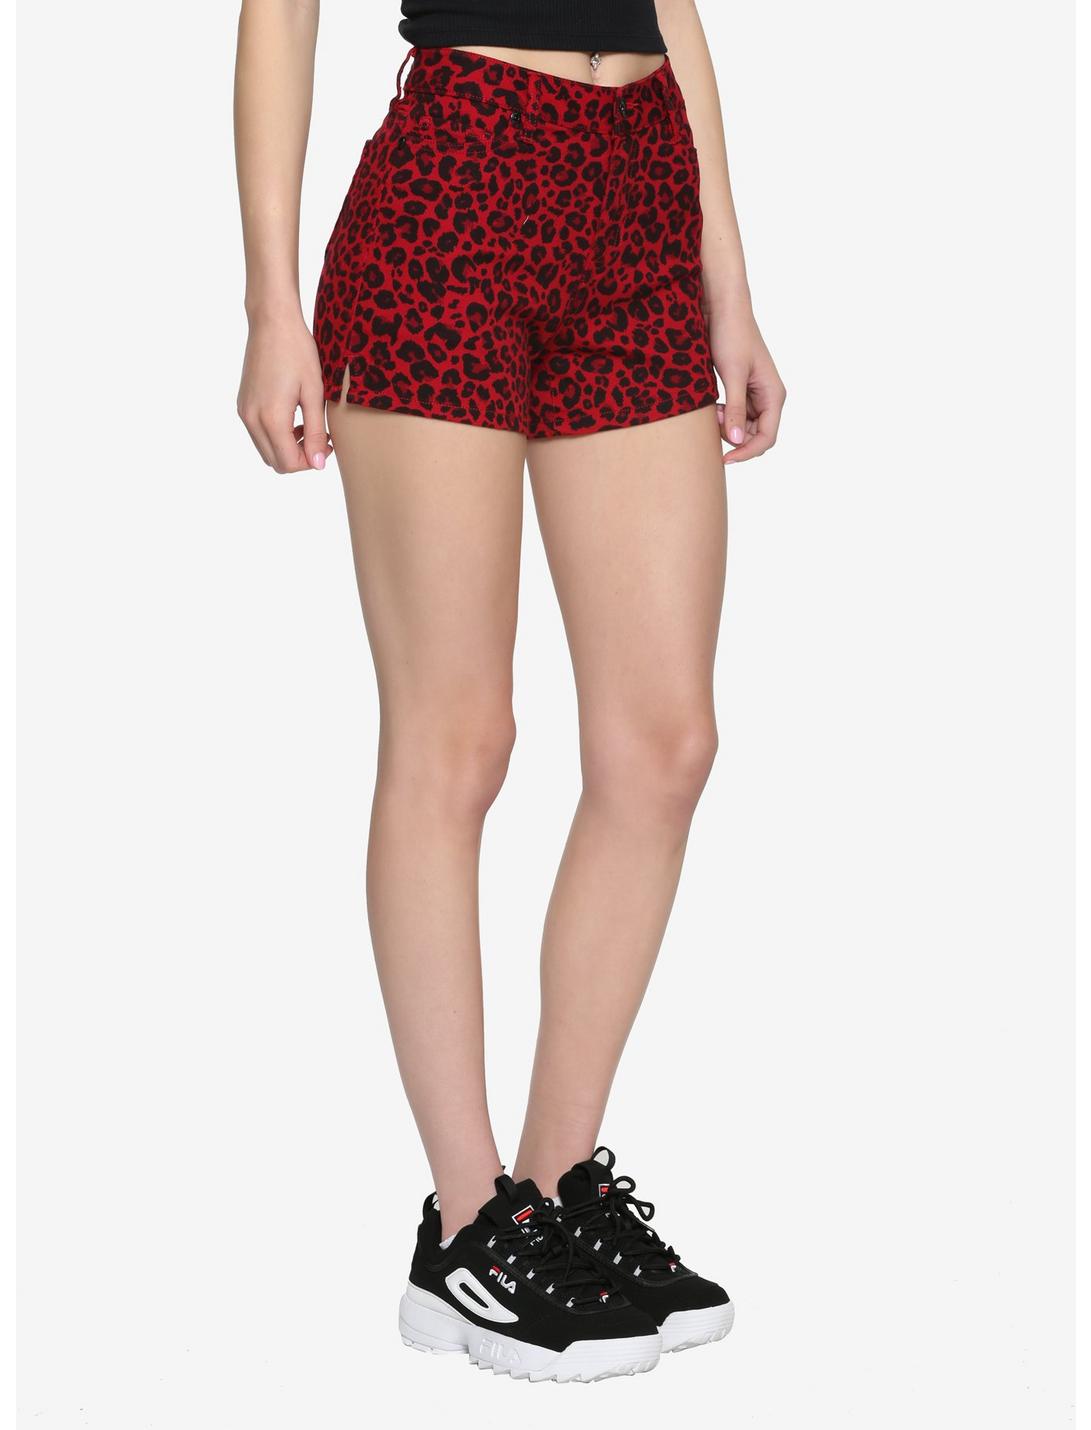 Cherry Red Leopard Print Skinny Shorts With Slits, LEOPARD, hi-res